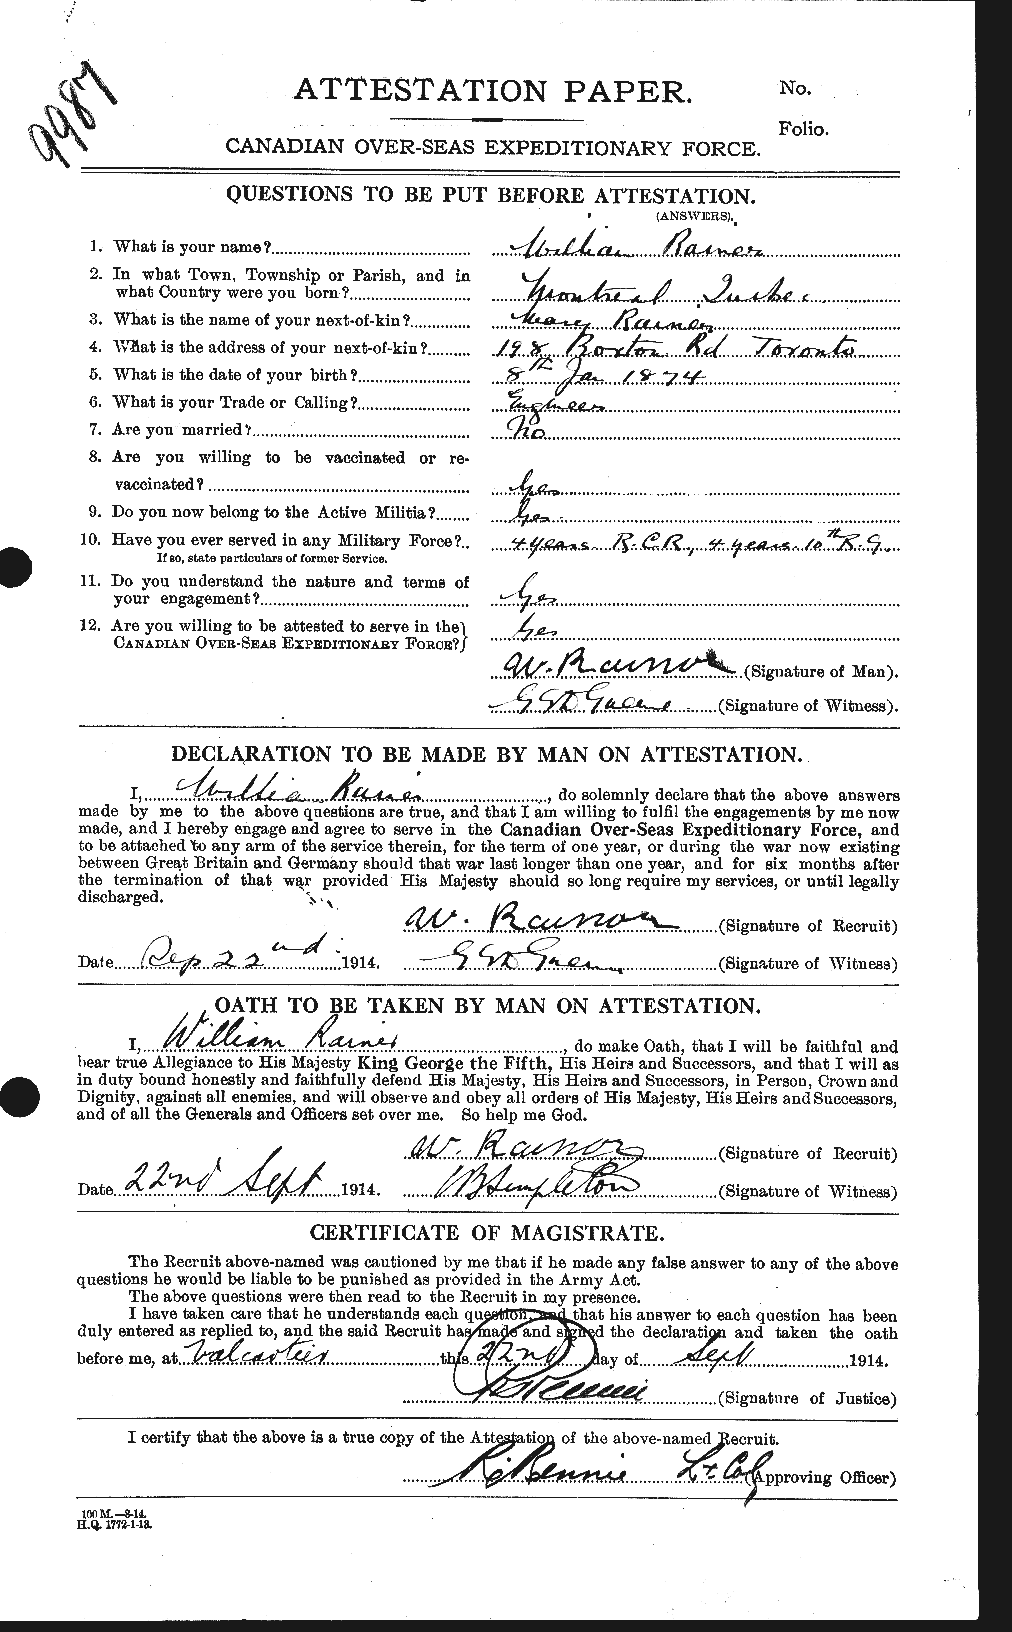 Personnel Records of the First World War - CEF 593229a